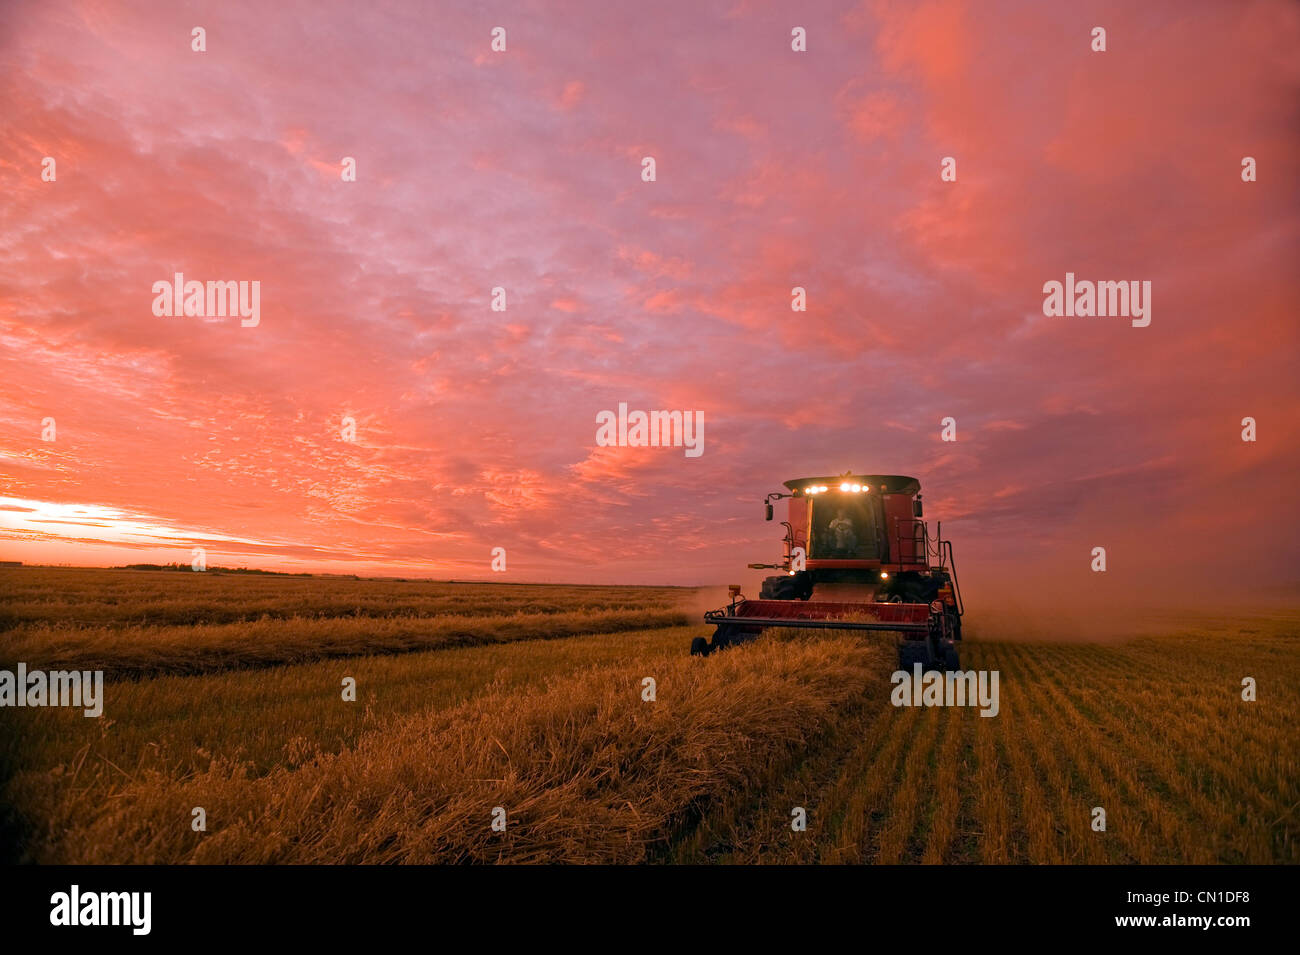 Farmer harvesting oat crop with a combine at dusk, near Dugald, Manitoba Stock Photo